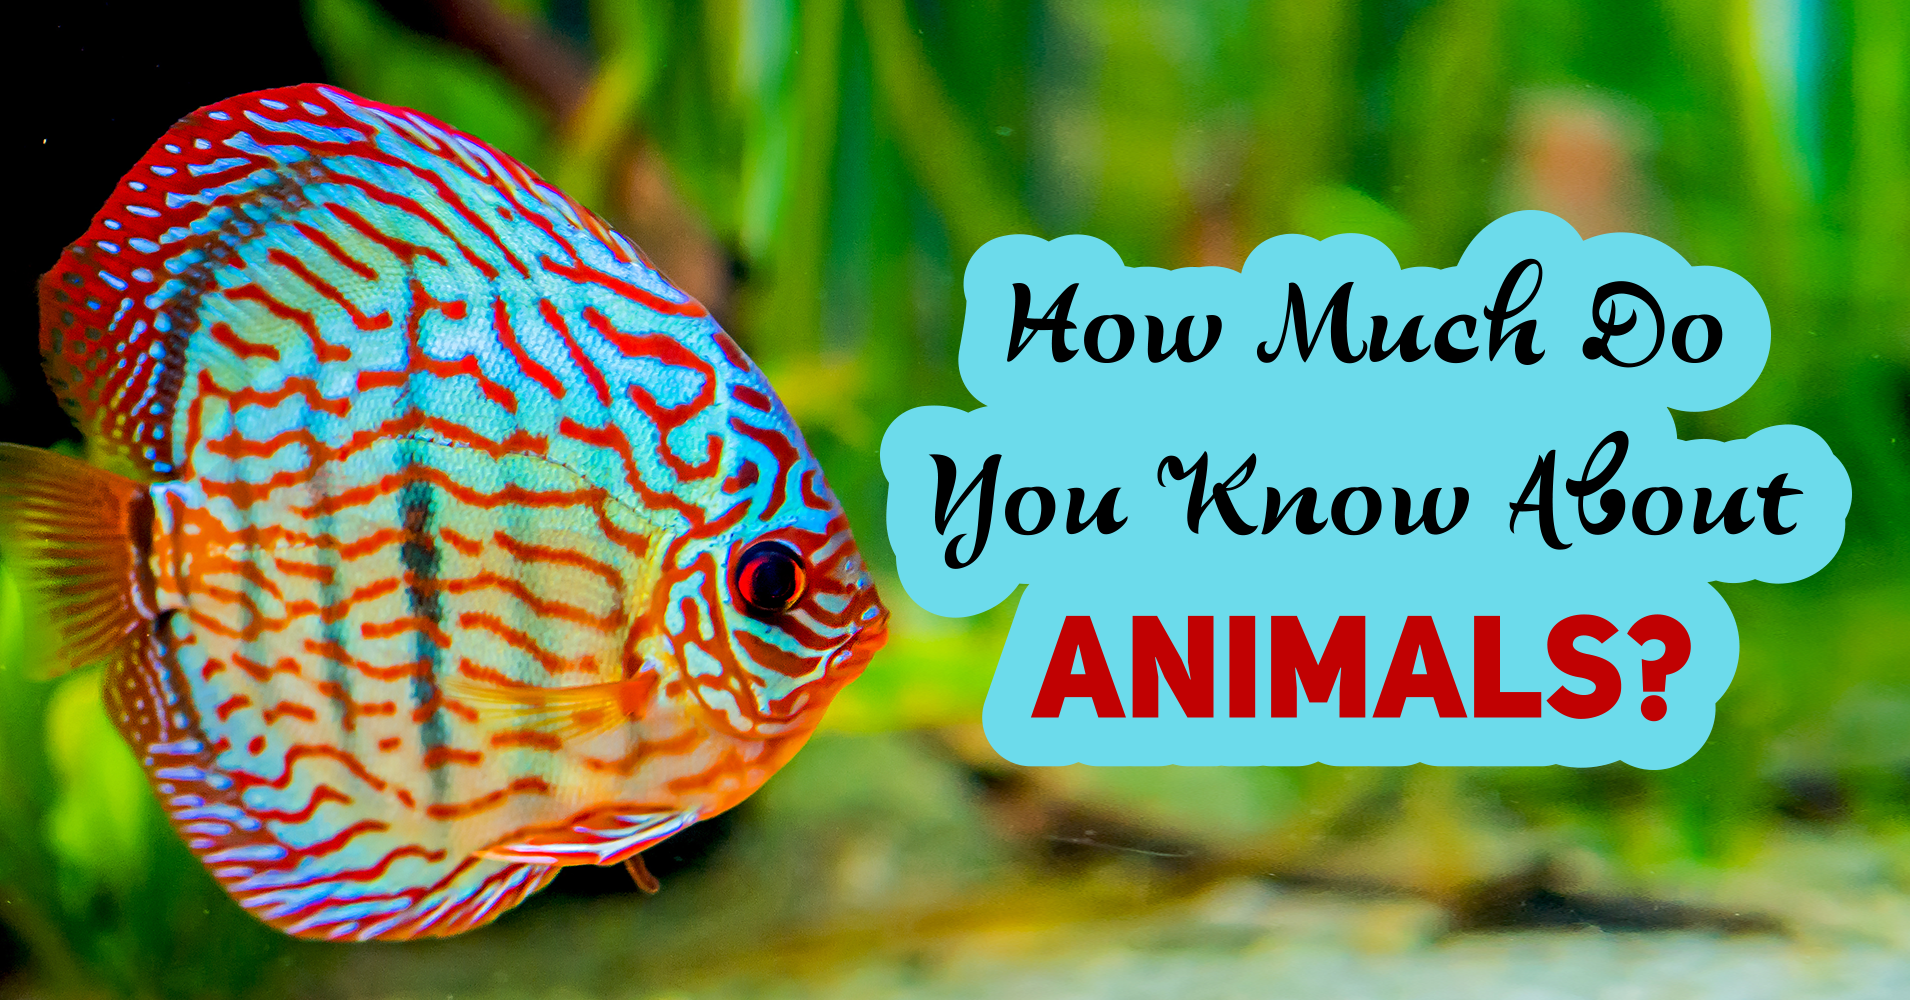 How Much Do You Know About Animals? - Quiz 